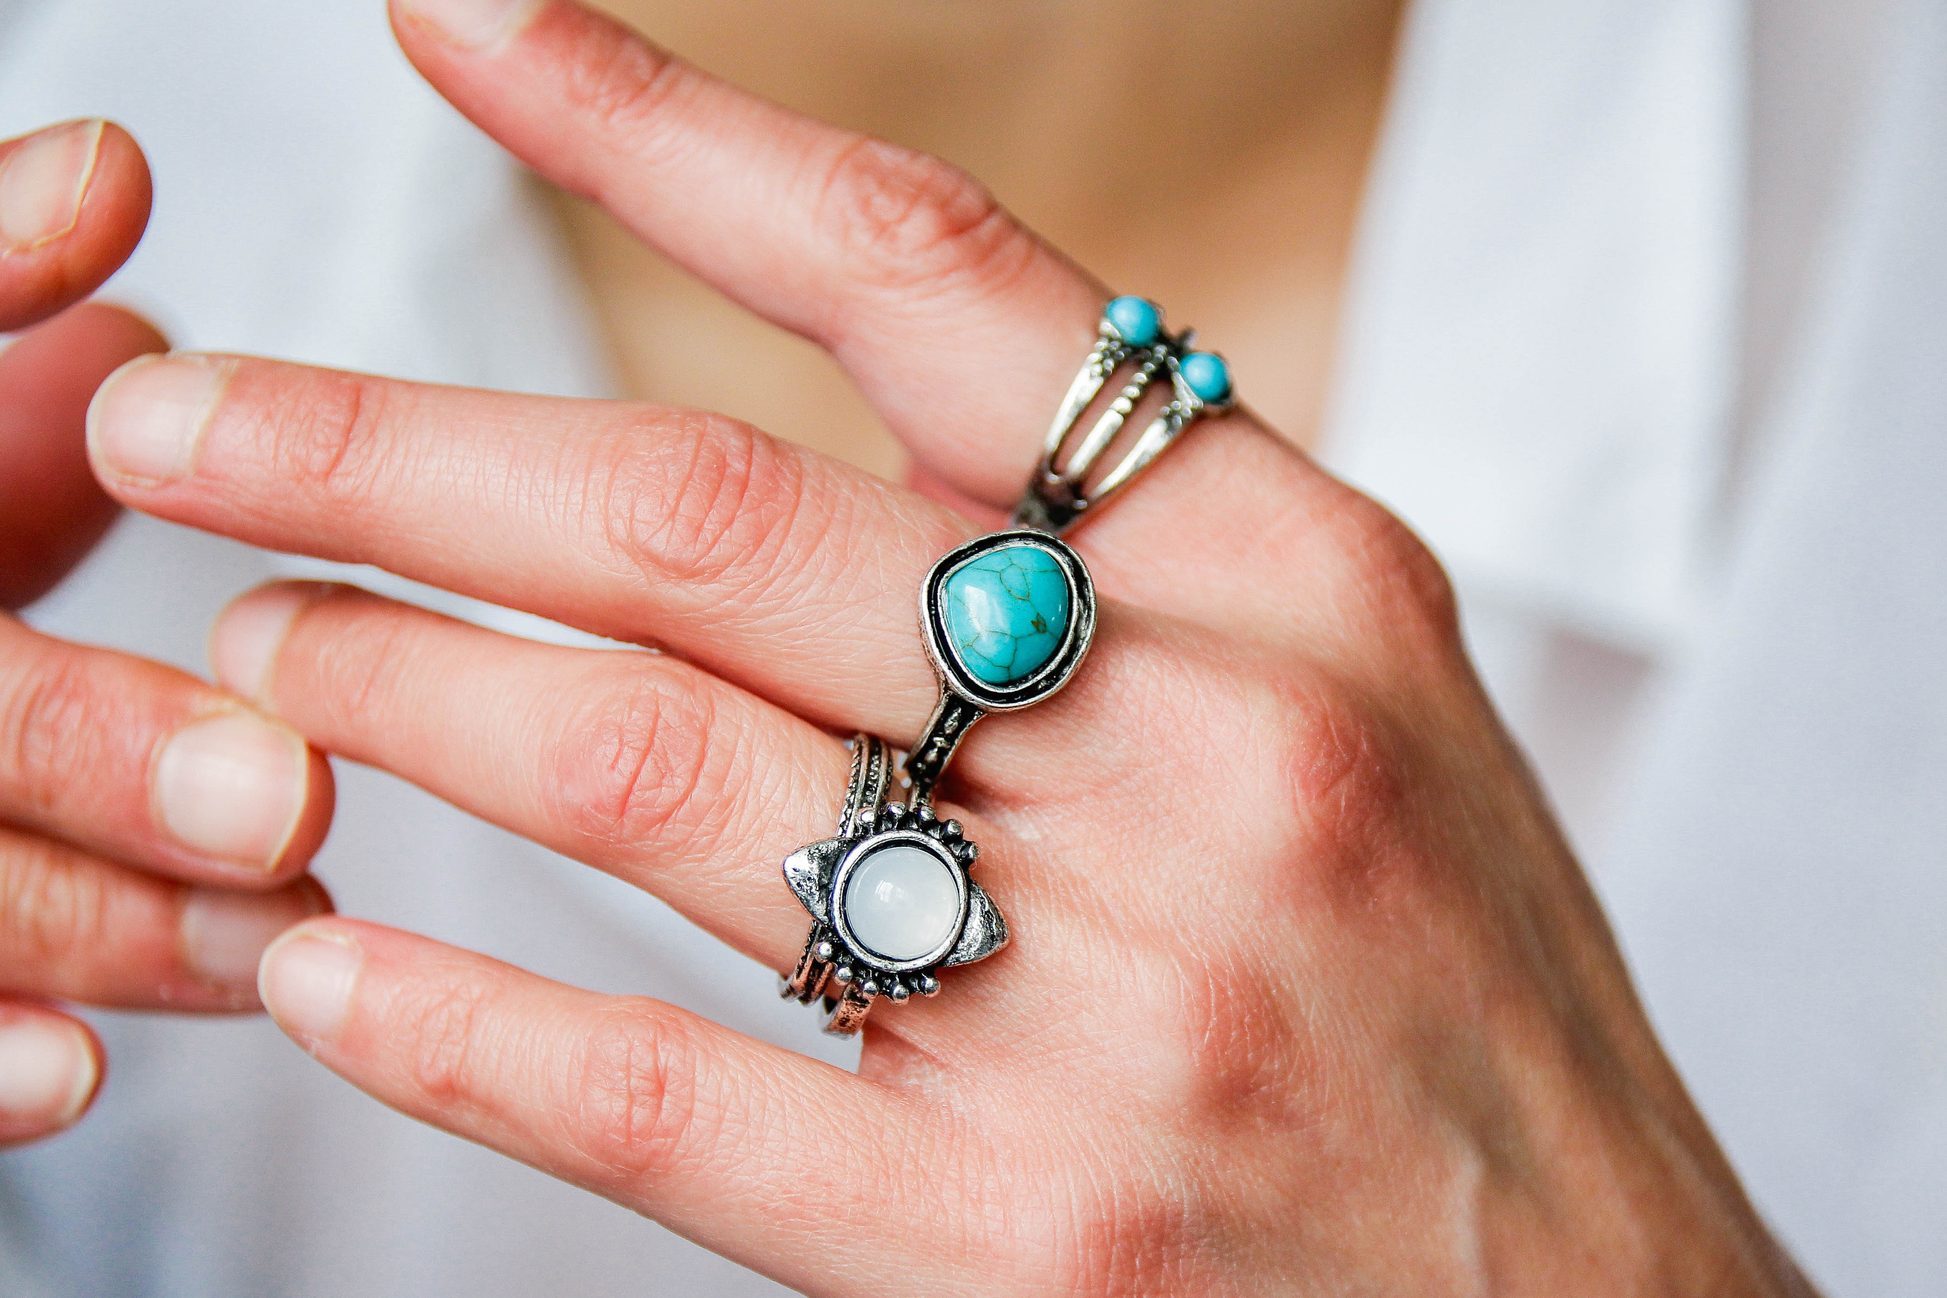 Jewelry, silver rings, turquoise